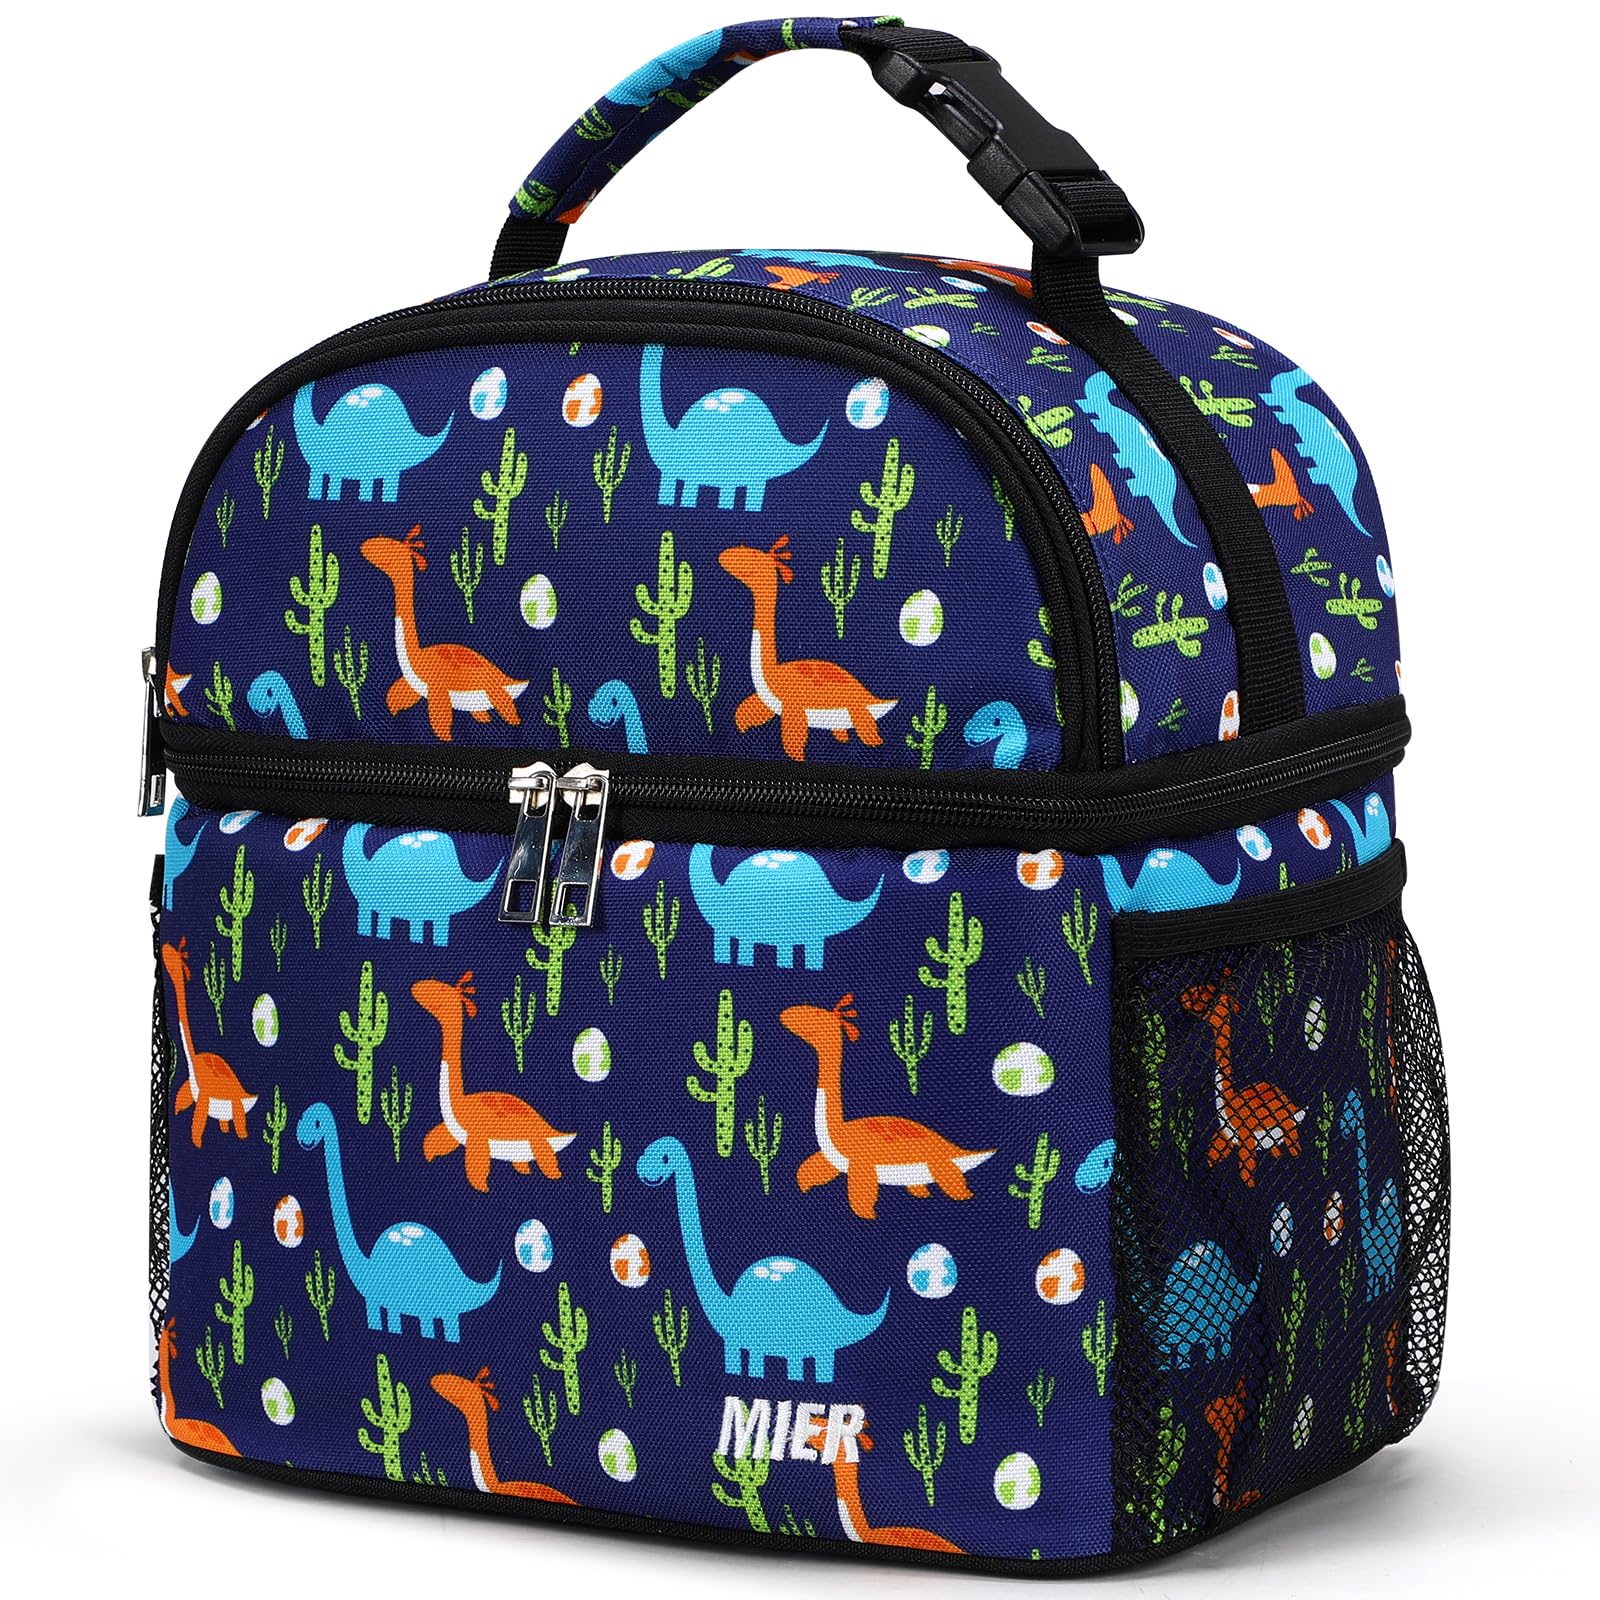 Kids Lunch Bag Insulated Toddlers Lunch Cooler Tote Kids Lunch Bag Blue Dinosaur MIER